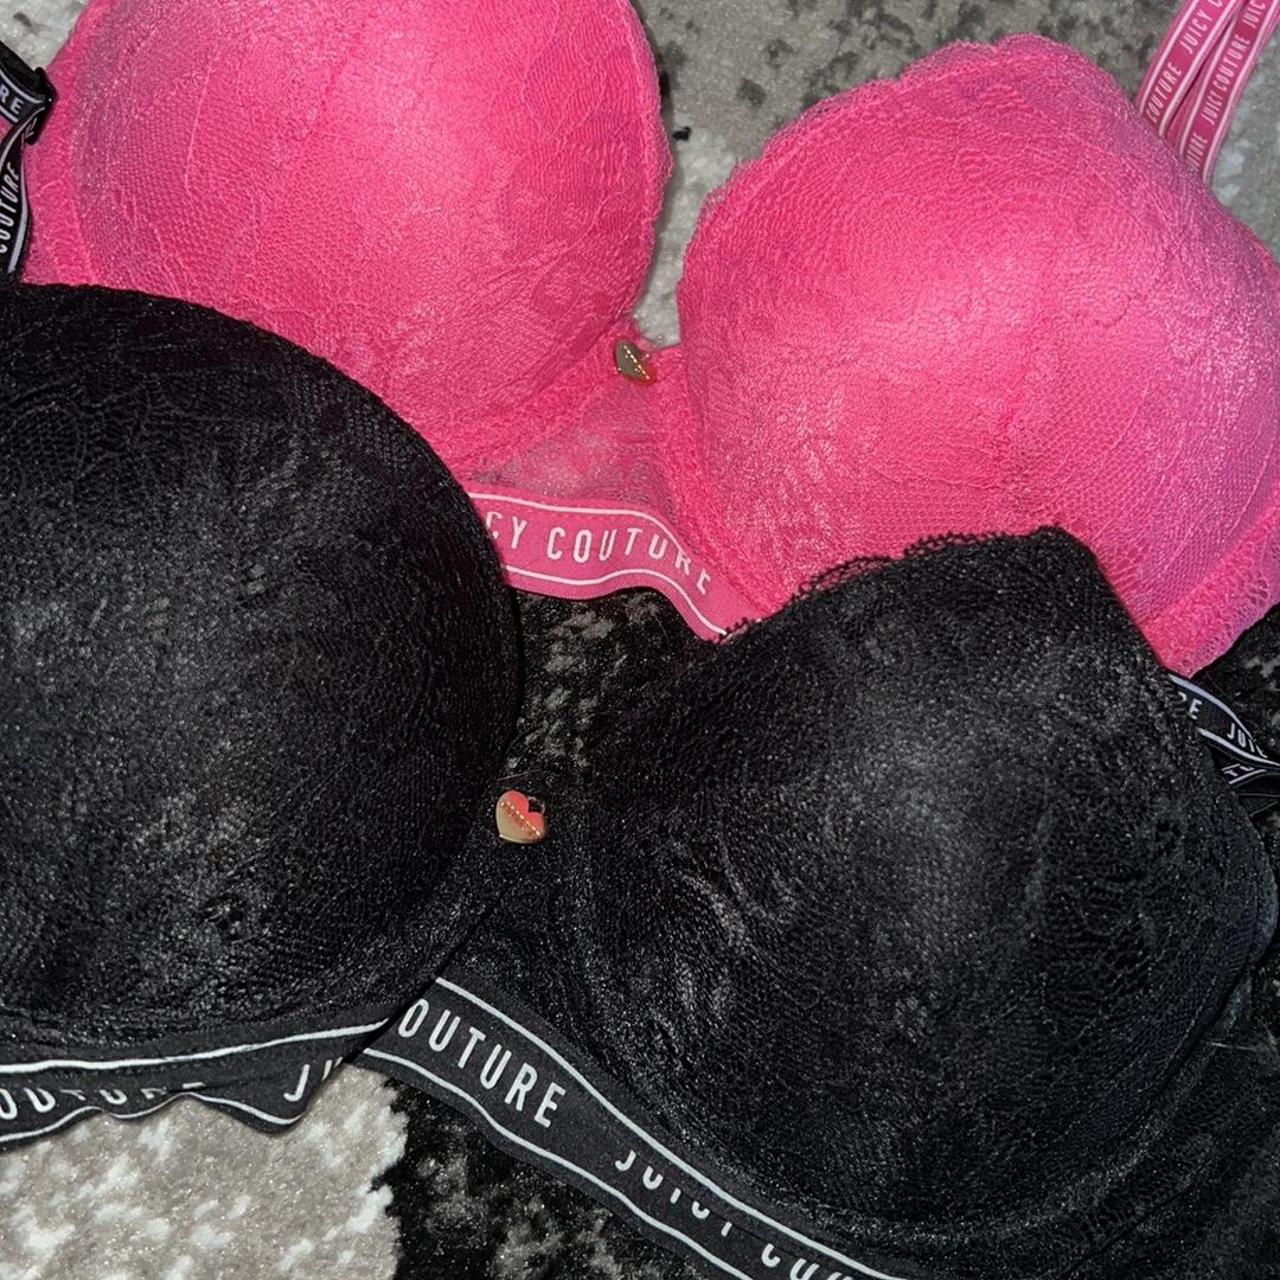 Buy Juicy Couture women 2 pcs padded all over print bra black pink Online